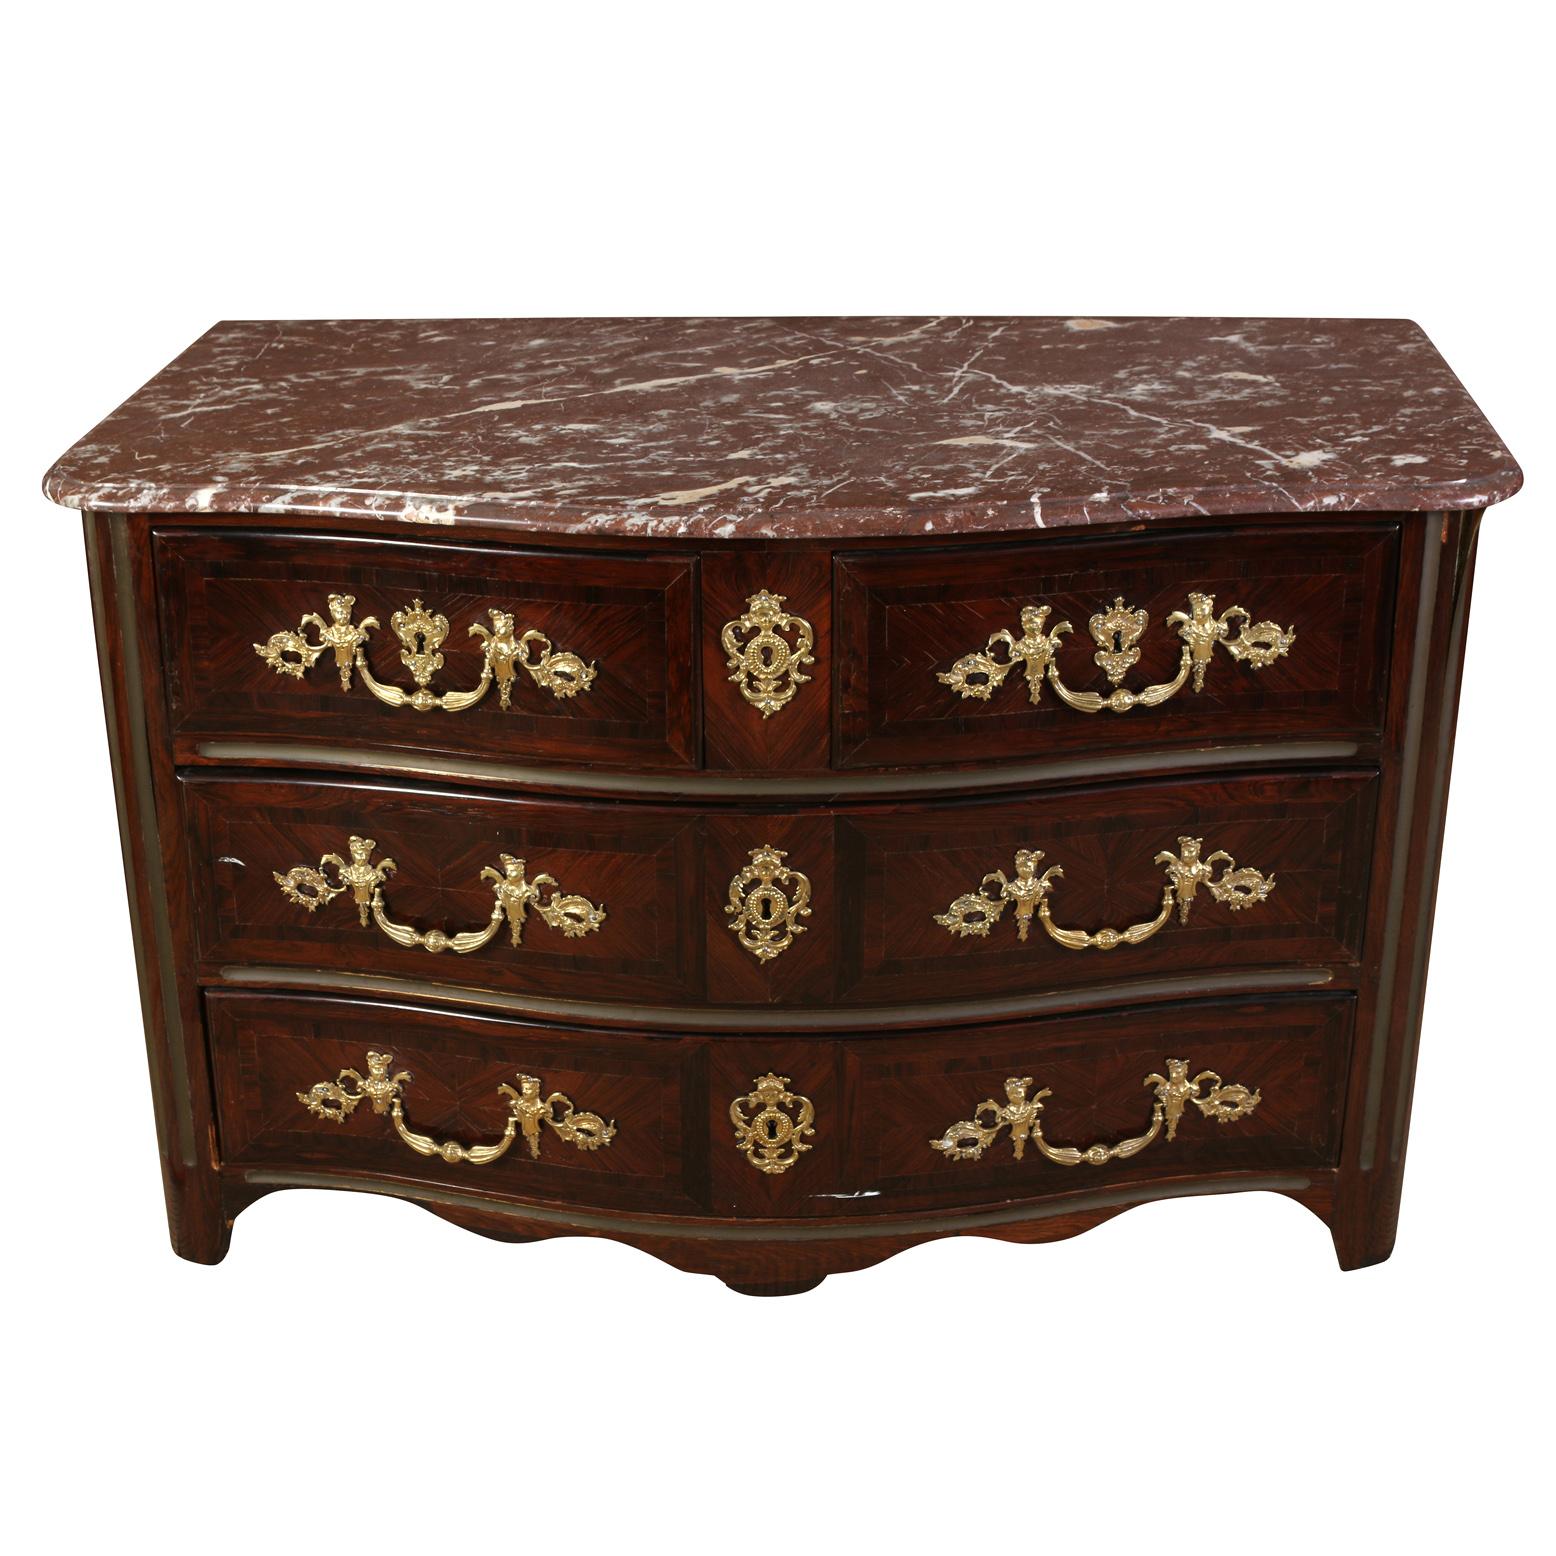 20th Century Regence Brass and Ormolu Mount Serpentine Front Commode For Sale